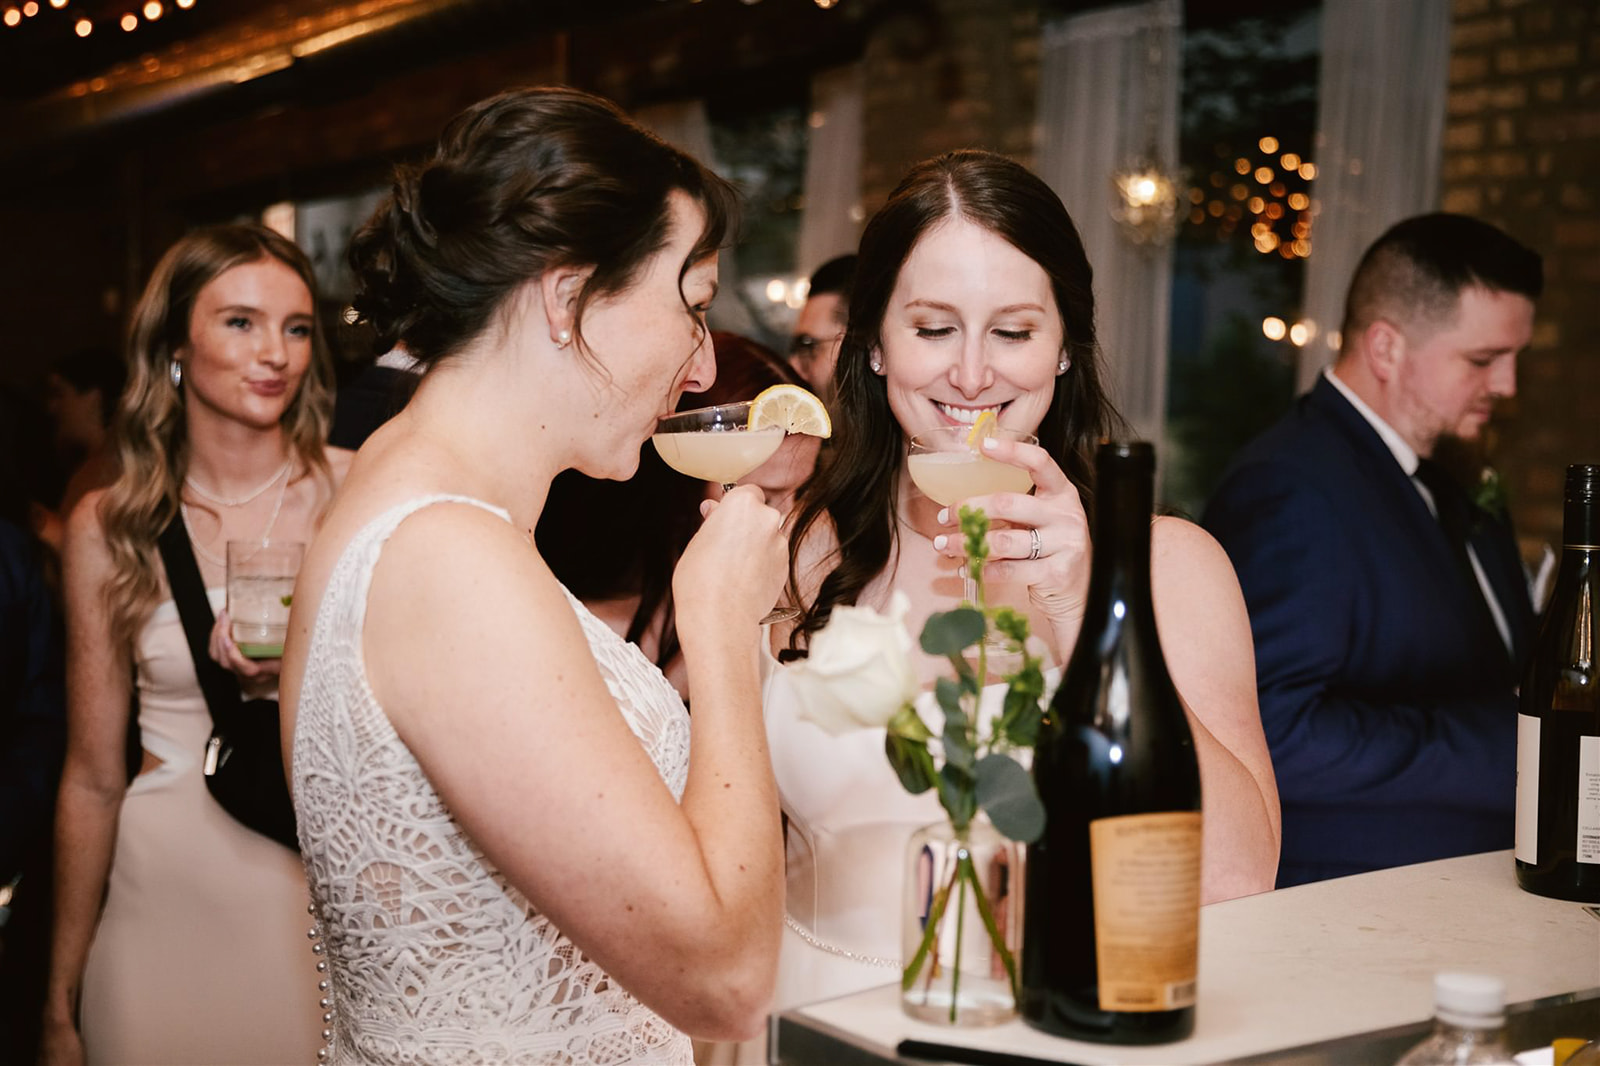 A same-sex couple sharing a toast at their wedding at Loft on Lake, capturing a moment of love and celebration.